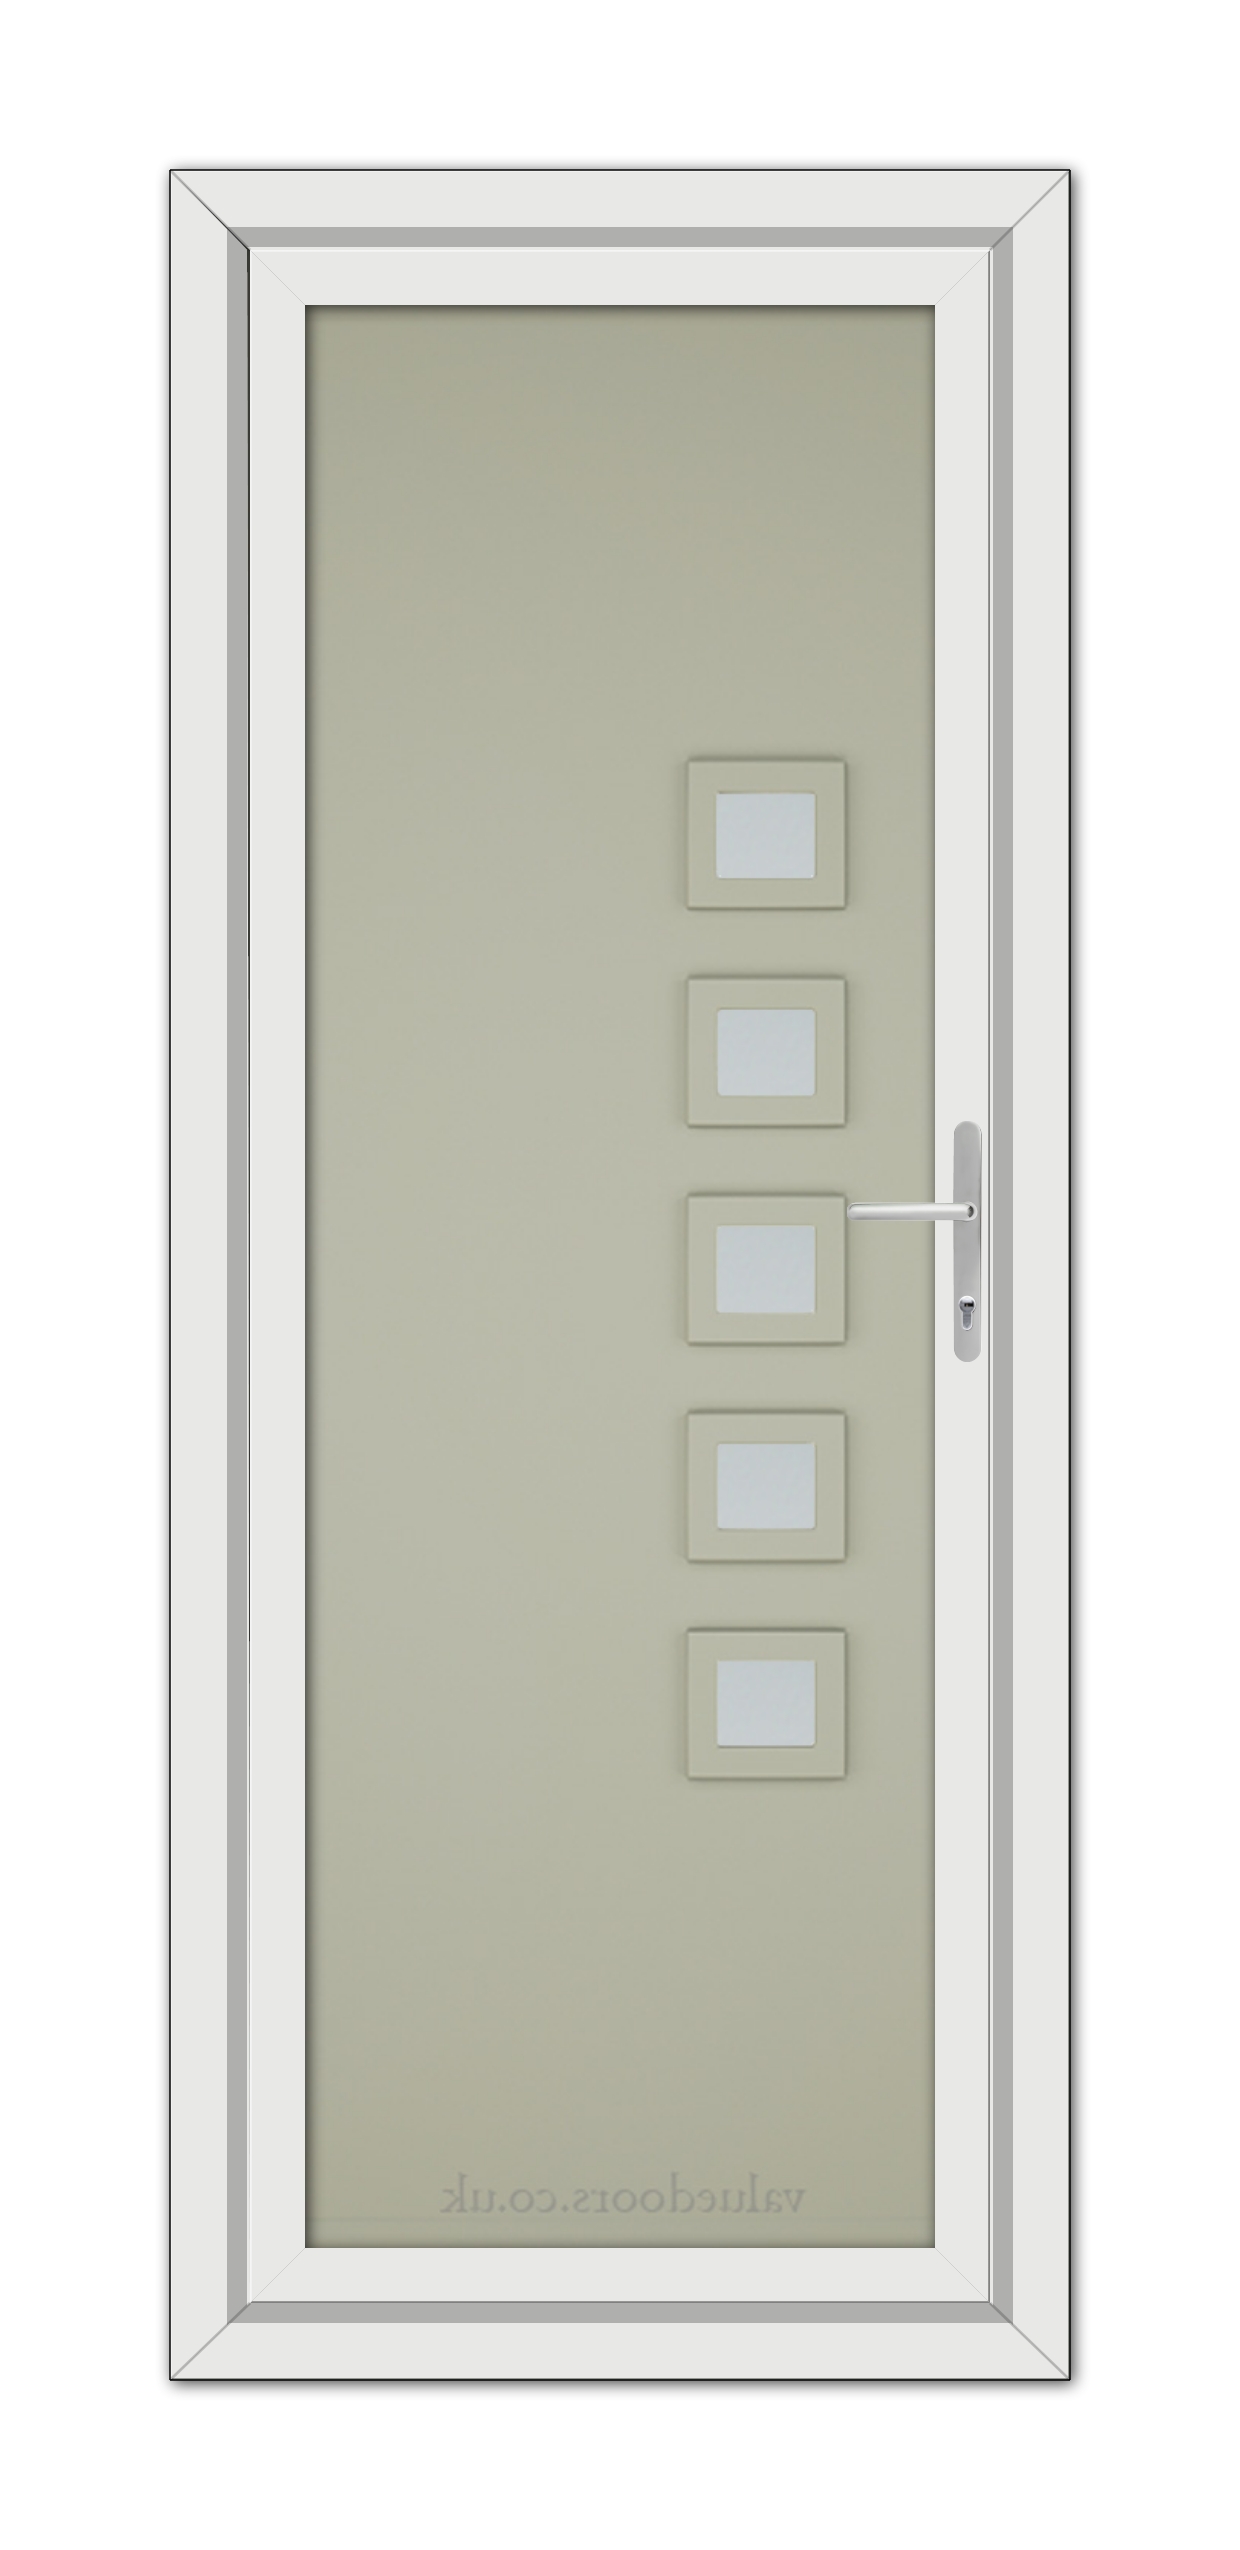 Agate Grey Malaga uPVC Door with a vertical line of five square windows and a silver handle, isolated on a white background.